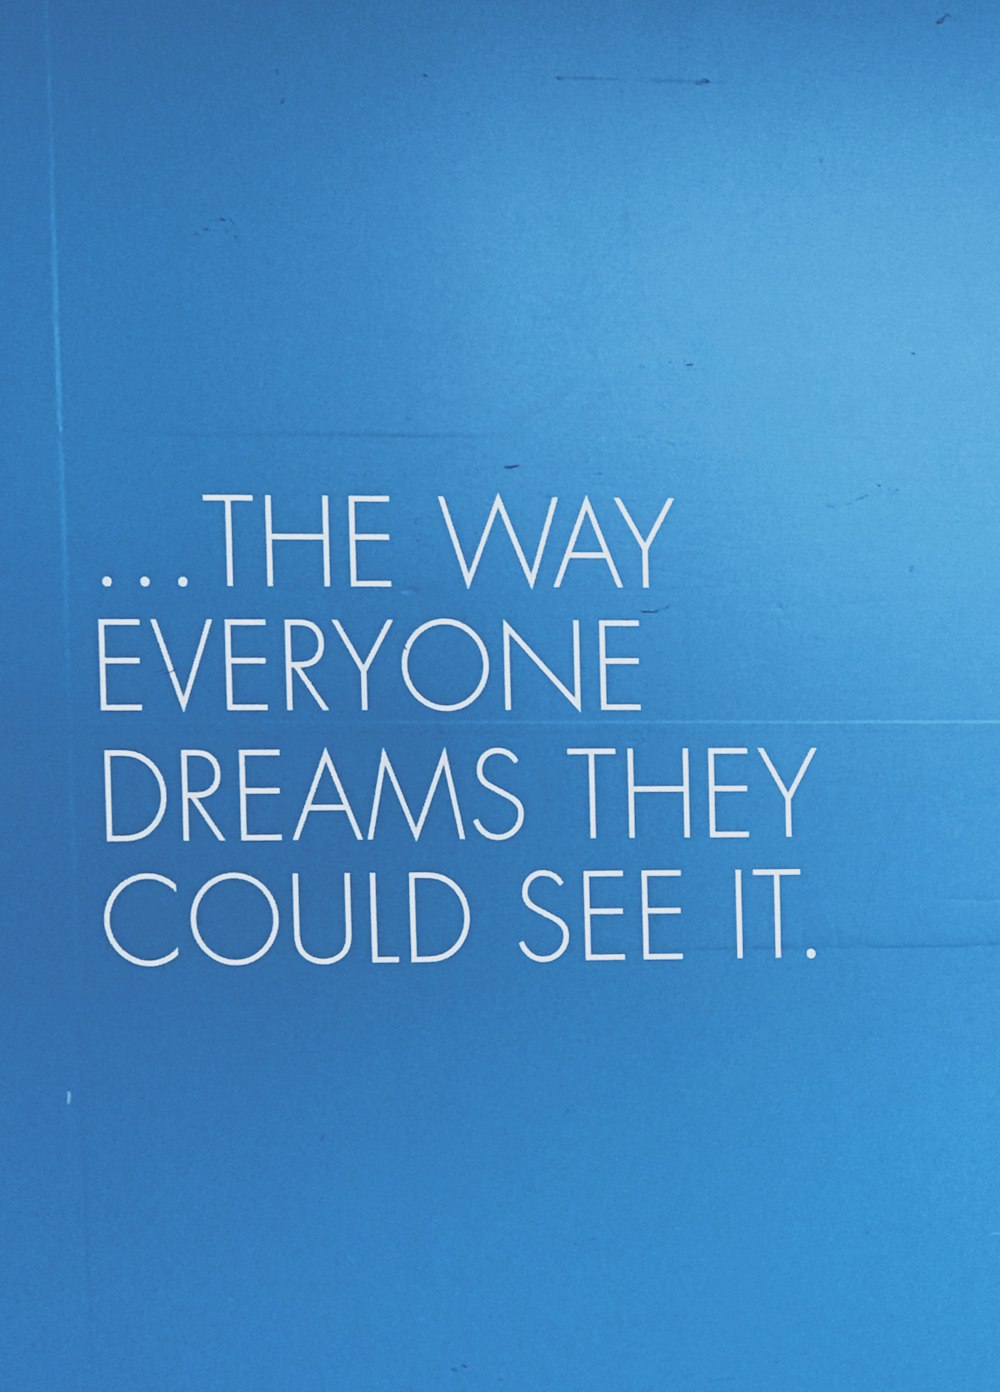 The way everyone dreams they could see it. text